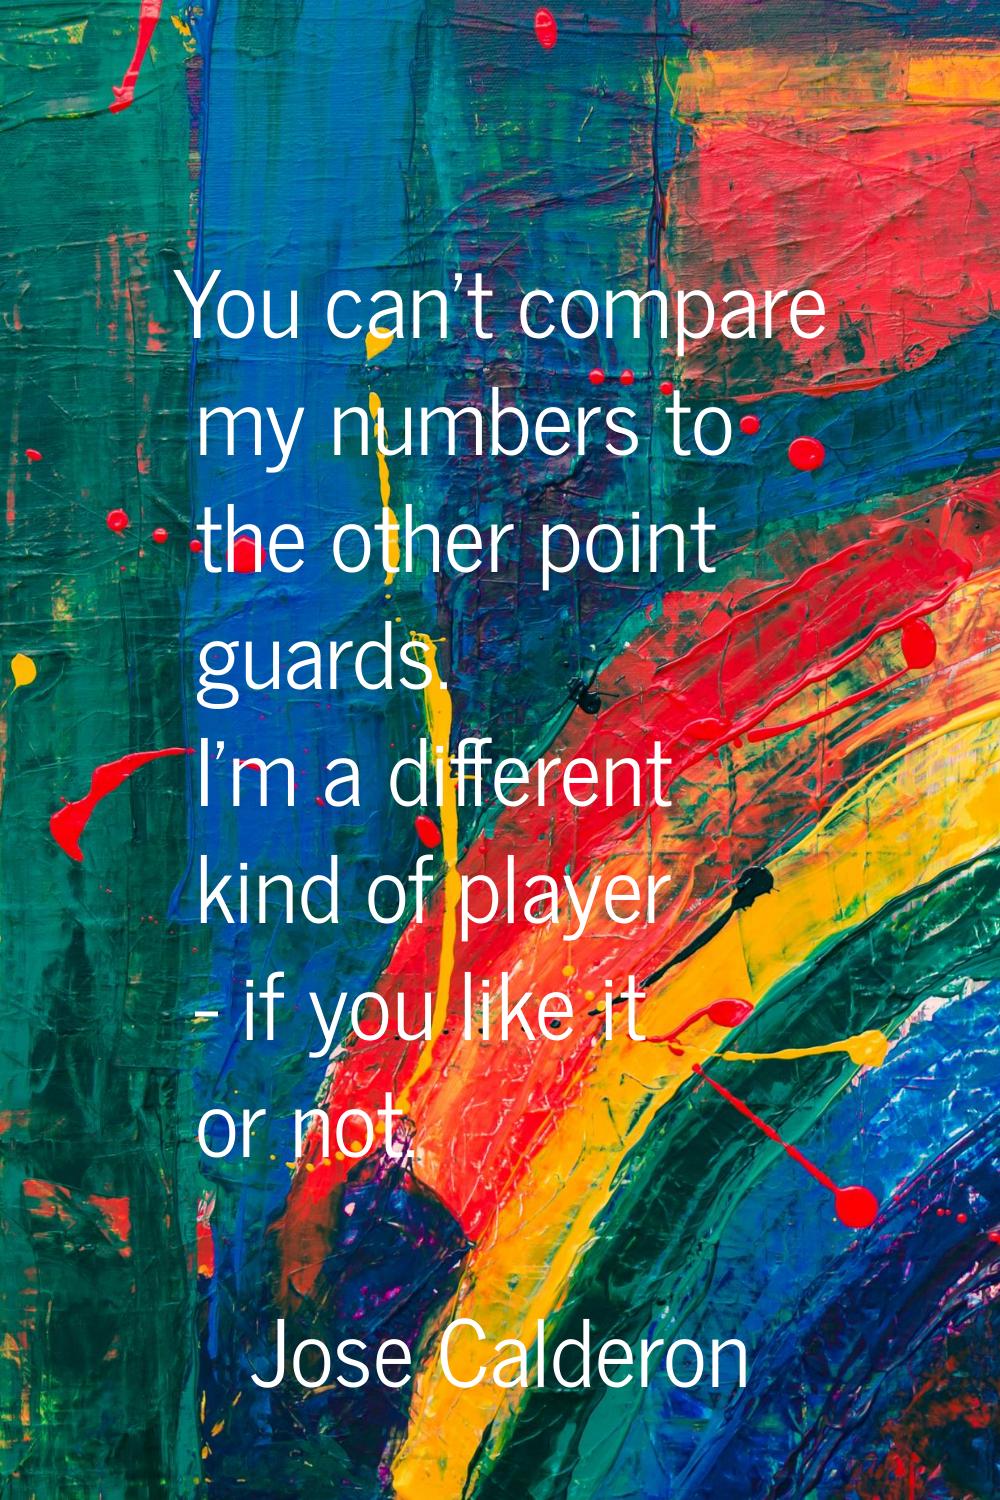 You can't compare my numbers to the other point guards. I'm a different kind of player - if you lik